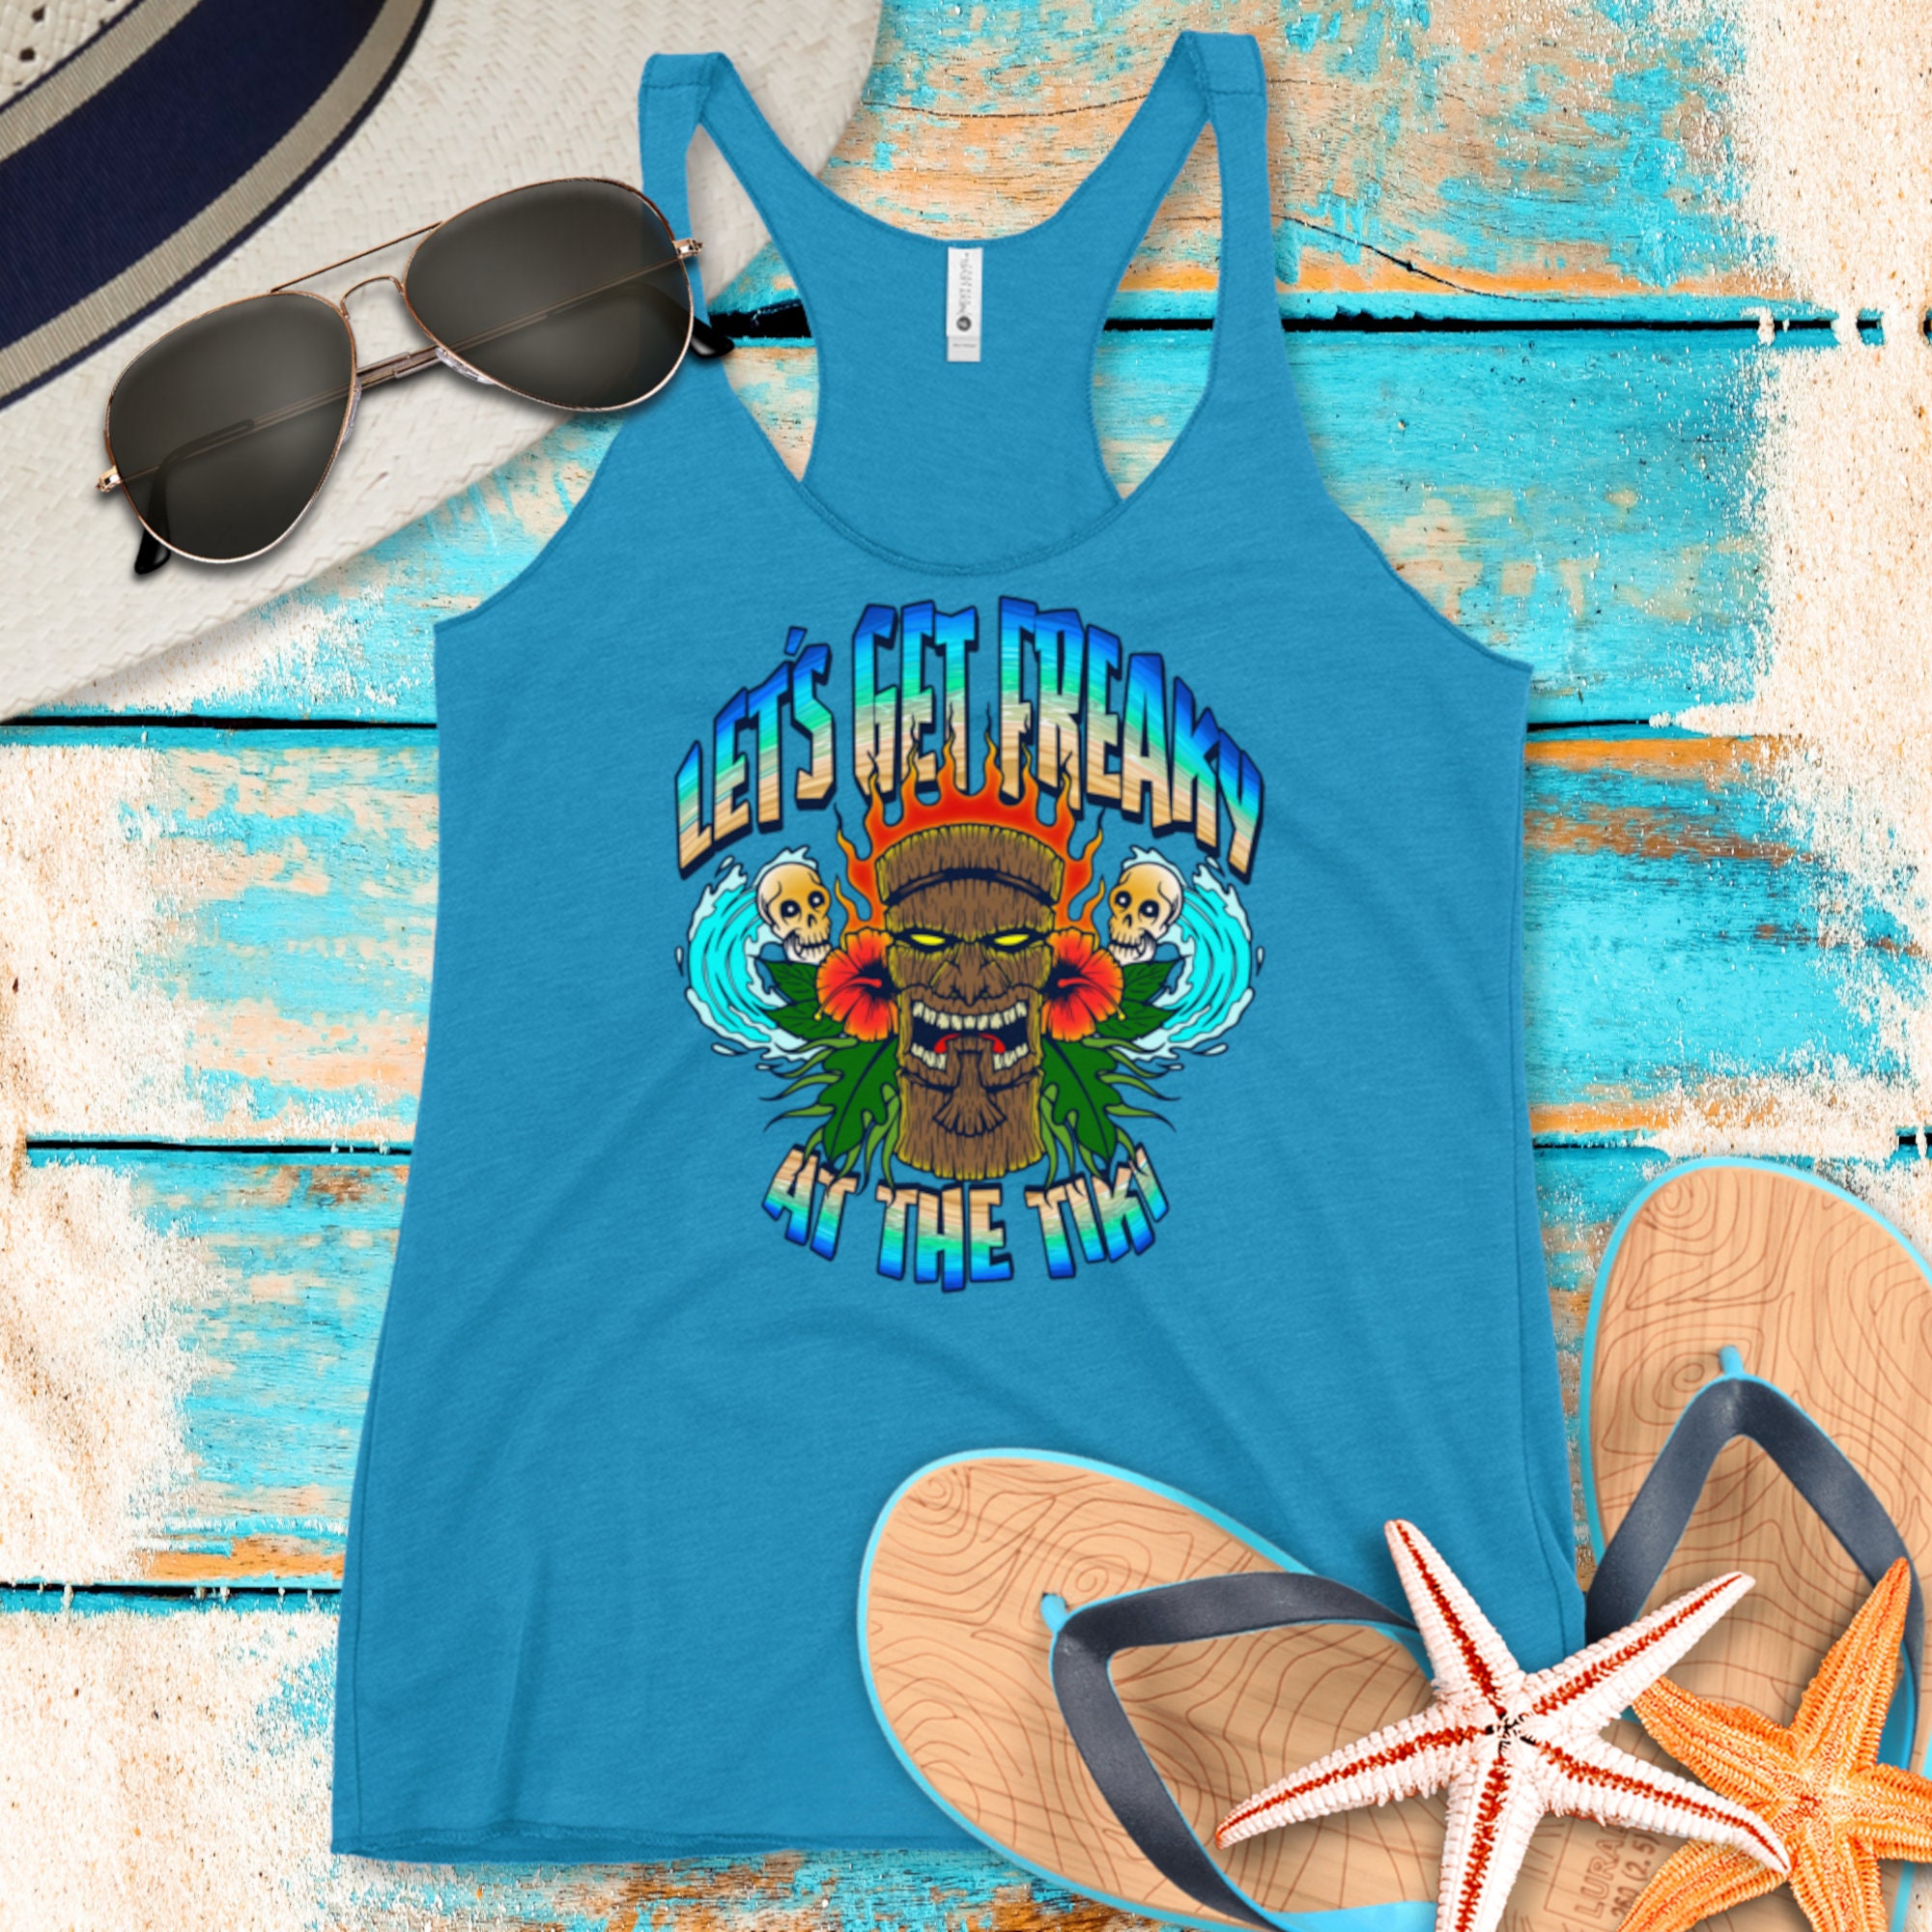 Let's Get Freaky At The Tiki Women's Racerback Tank Top